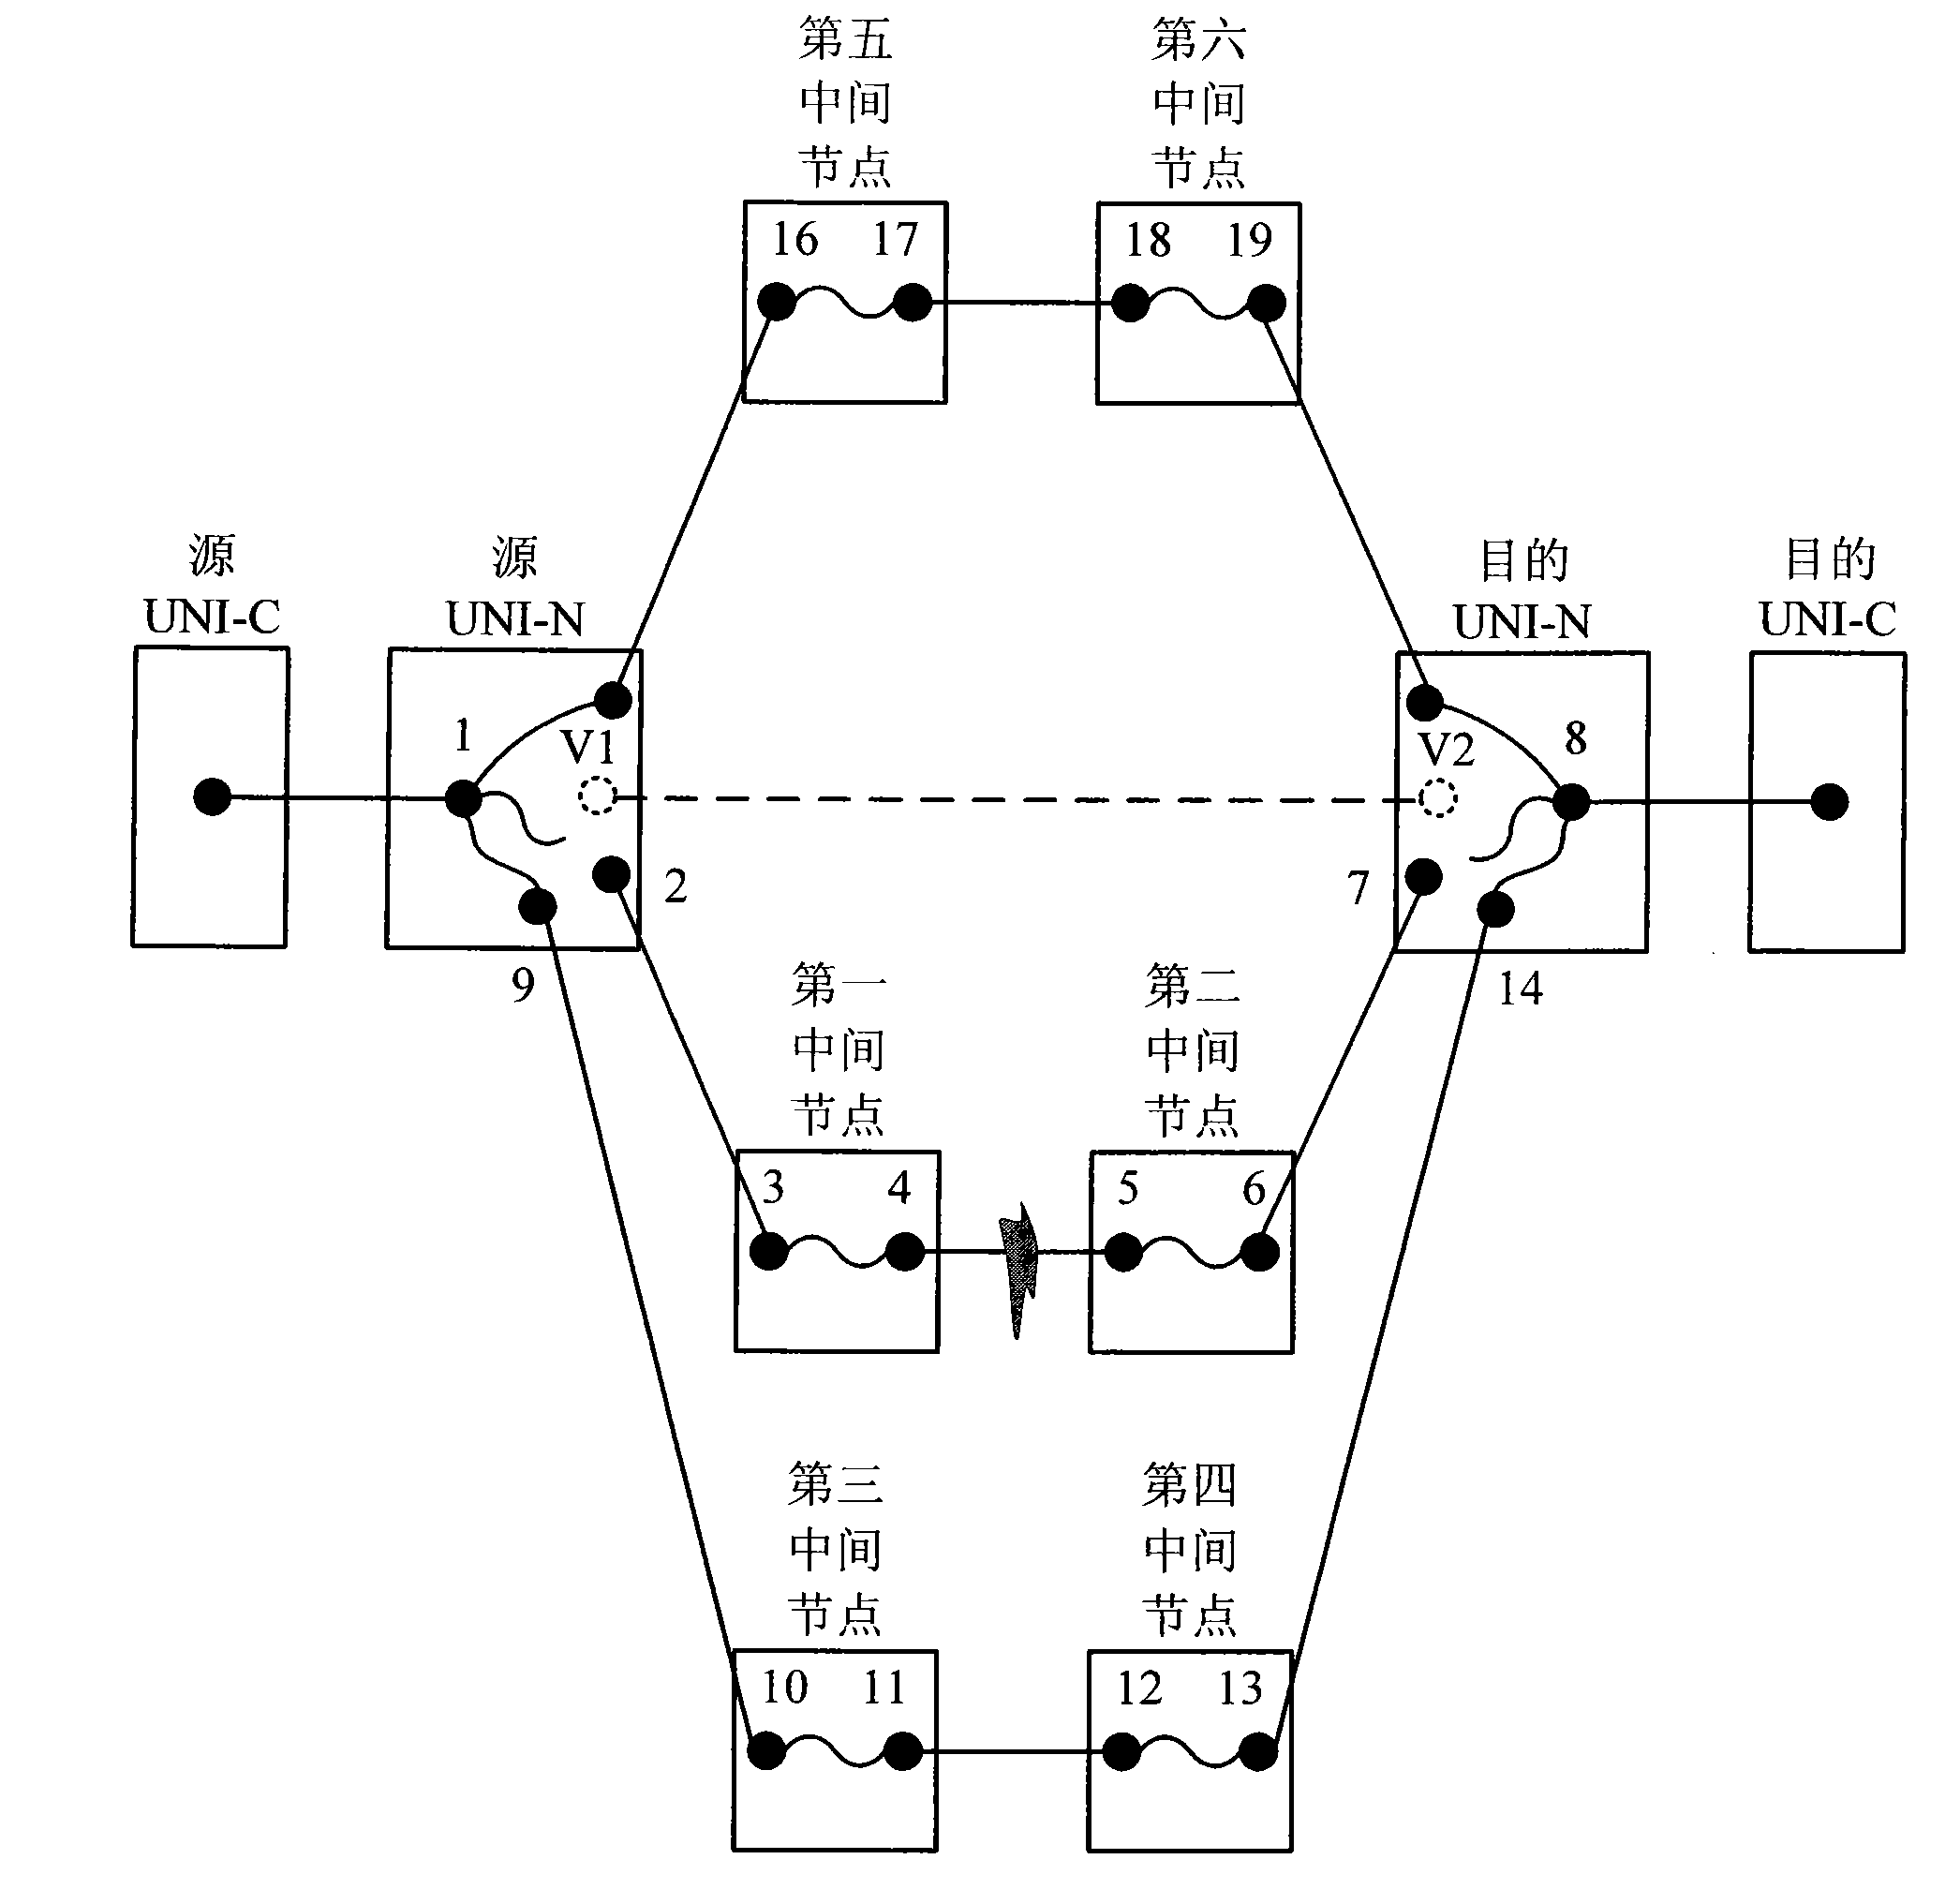 System and method for establishing switched connection in automatic switched optical network (ASON)